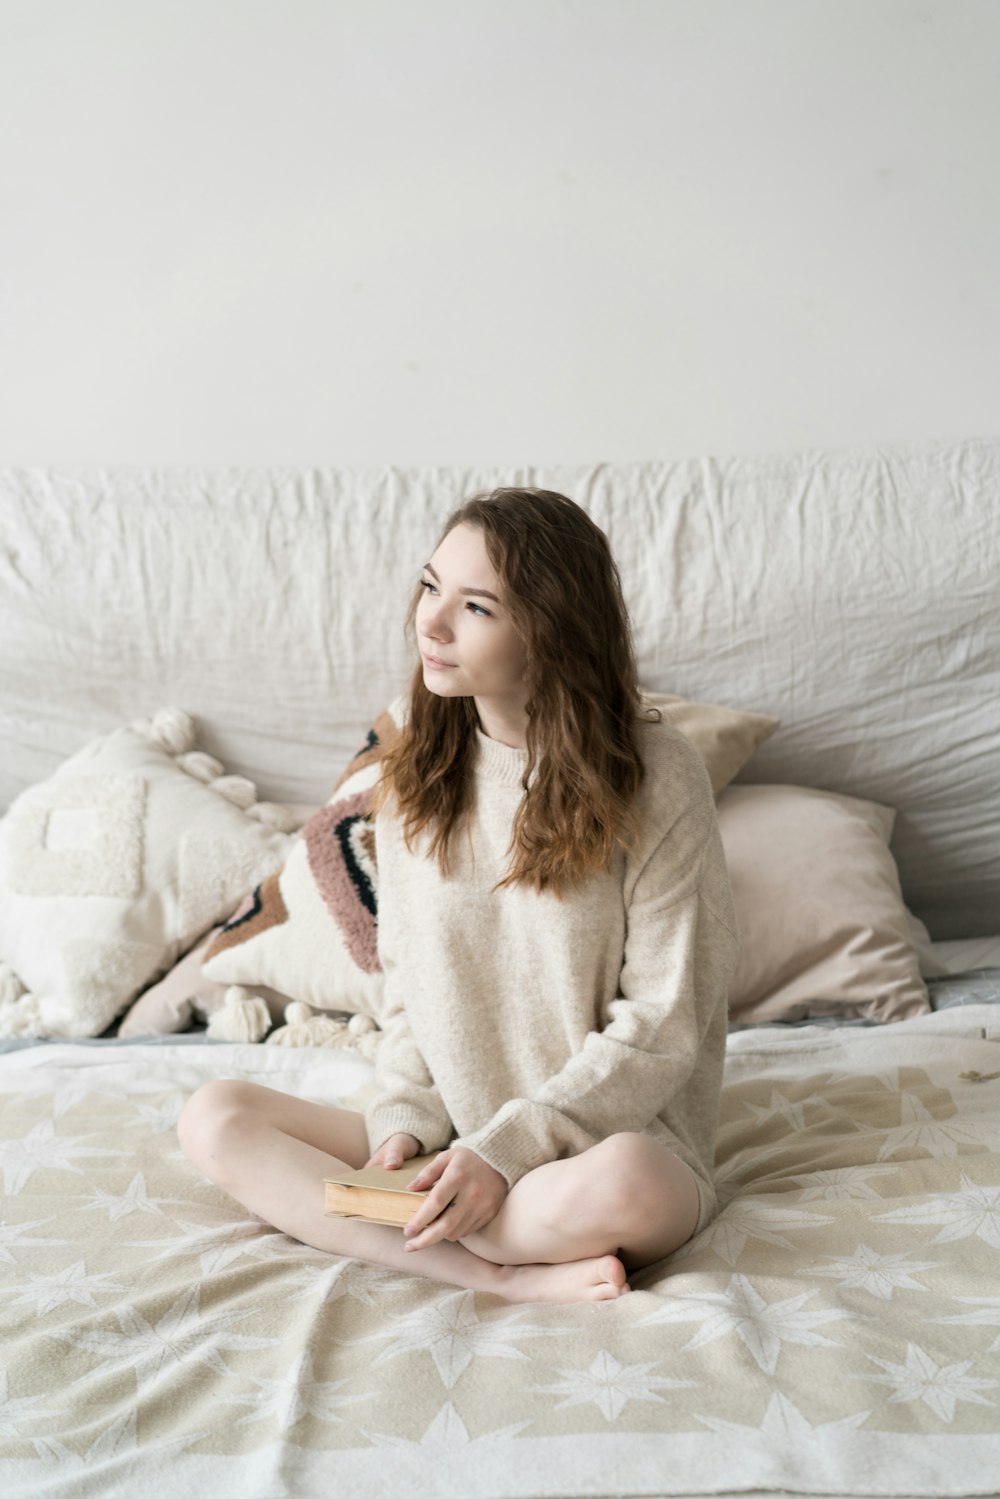 a woman sitting on top of a bed next to pillows